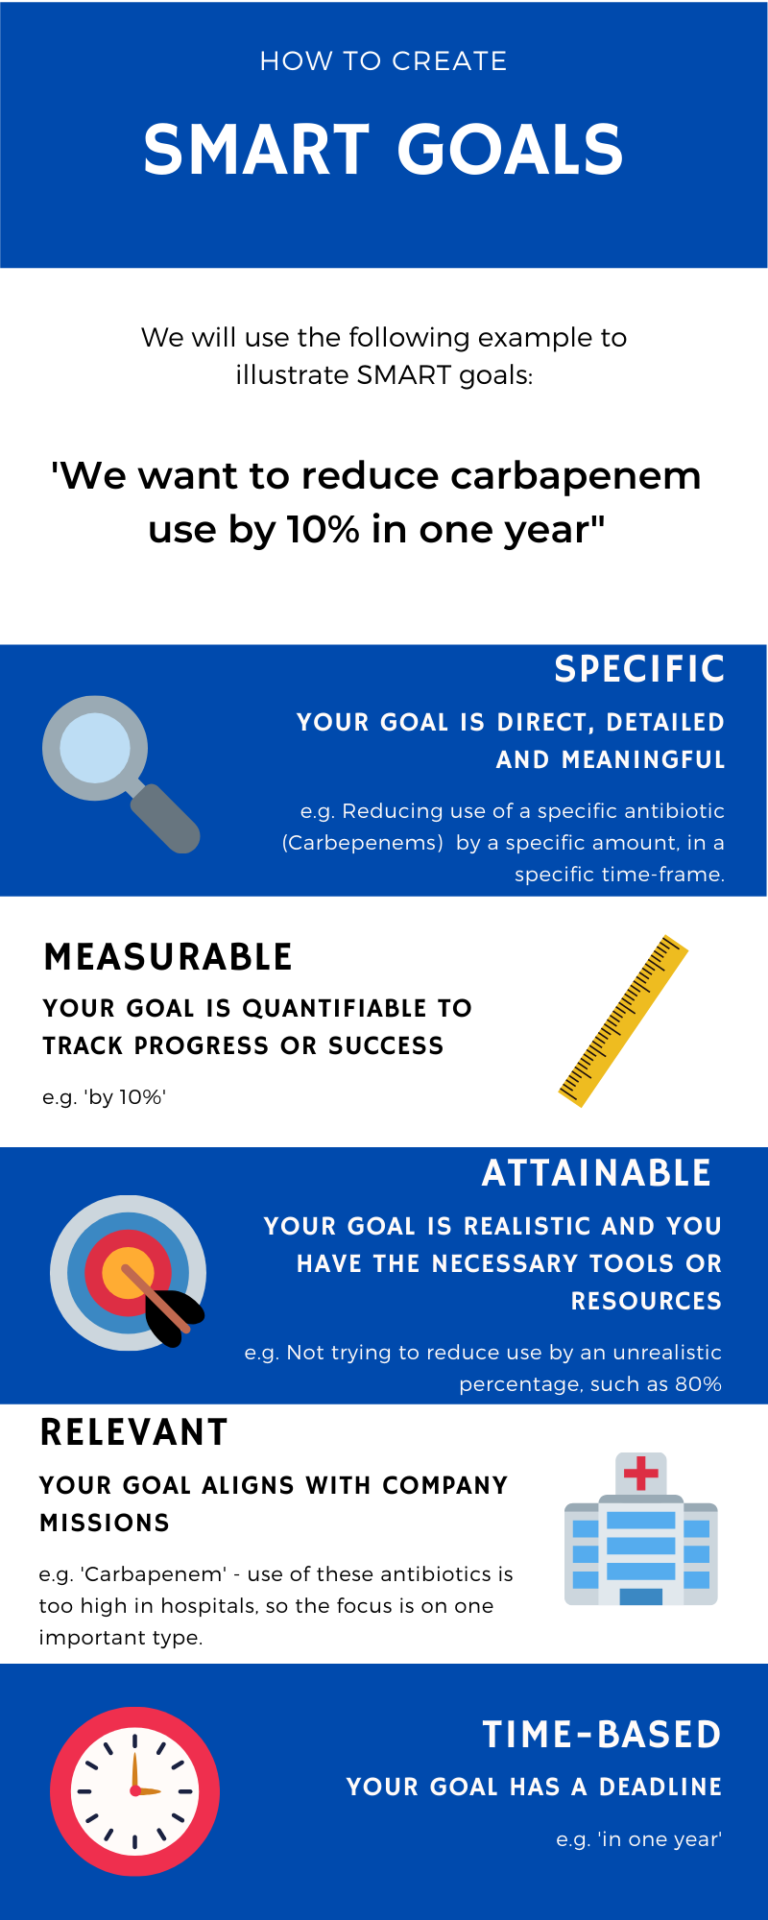 Infographic detailing what SMART goals are - these are Specific, Measurable, Attainable, Relevant, and Time-Based. The example provided of a 'SMART goal' is 'we want to reduce carbepenem use by 10% in one year'.